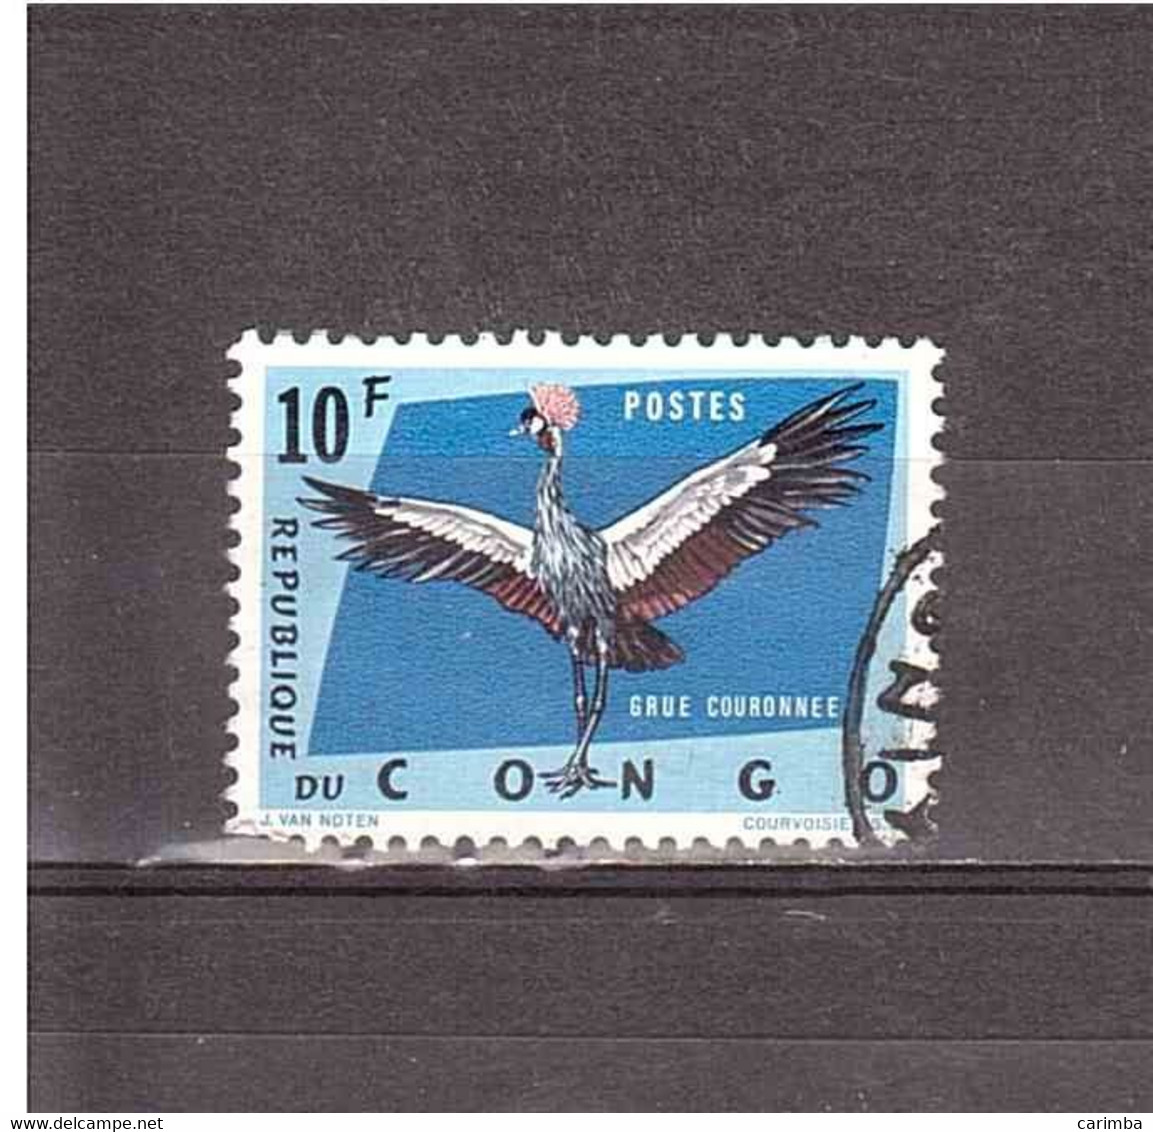 1963 GRUE COURONNEE - Used Stamps